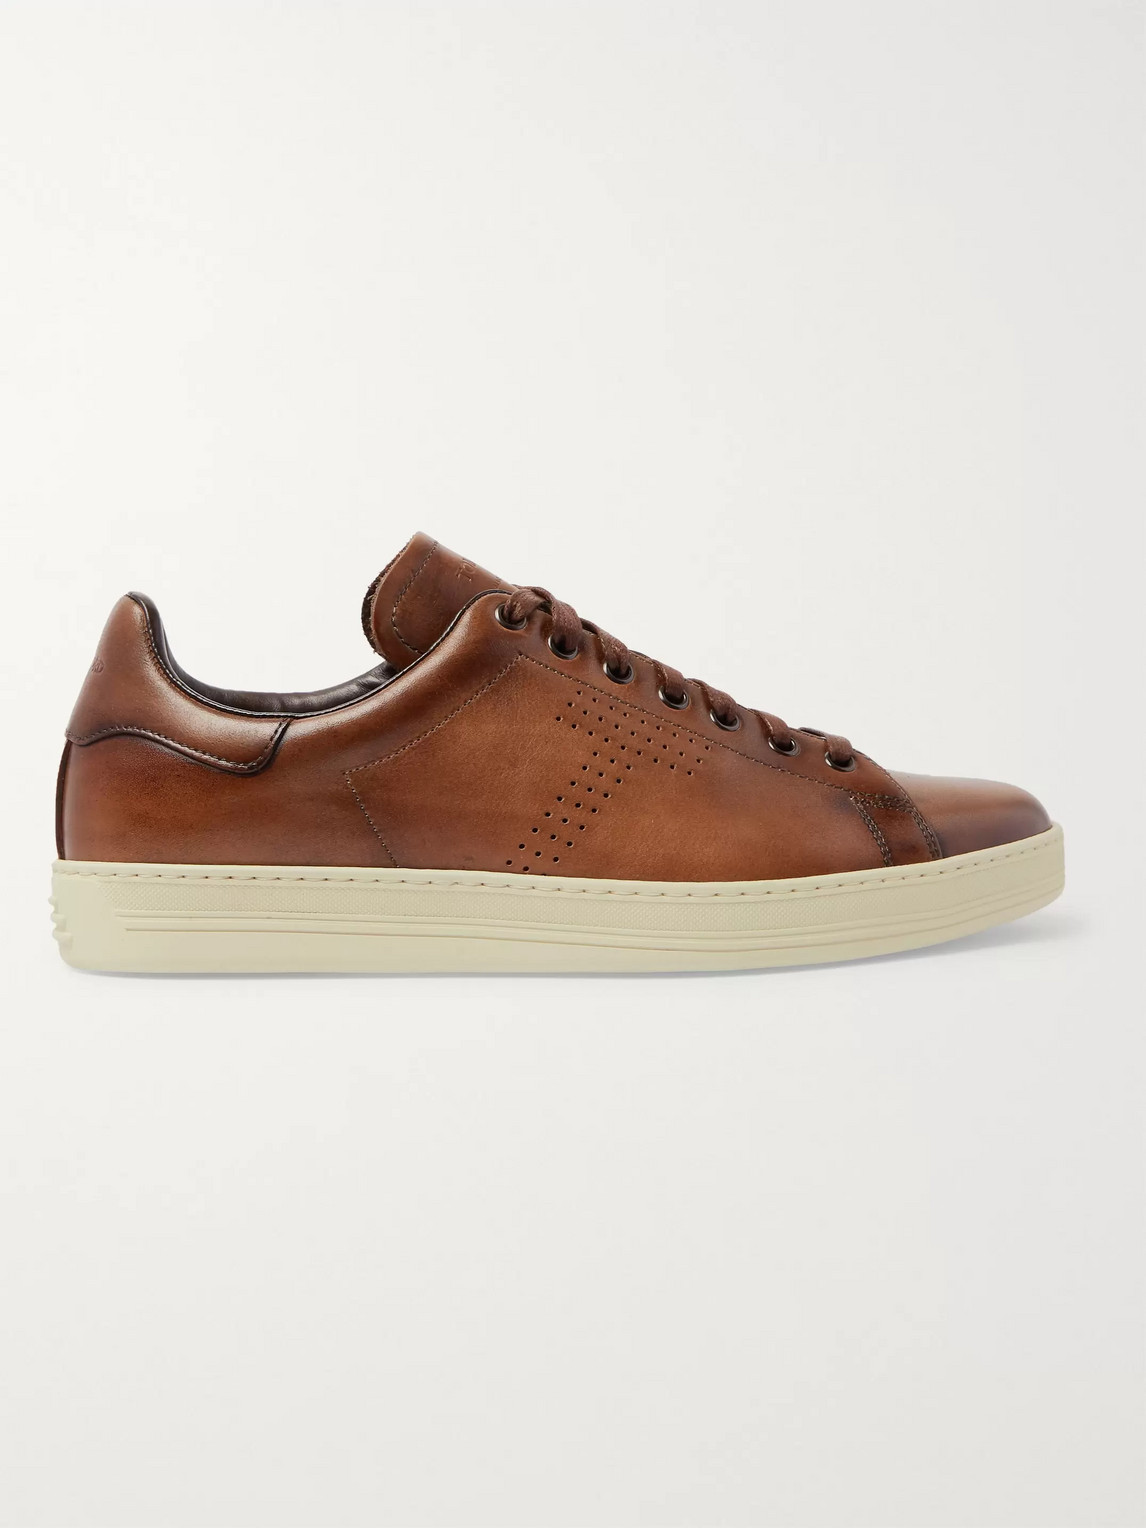 Tom Ford Sneaker Smooth Leather Hole Pattern Logo Brown | ModeSens